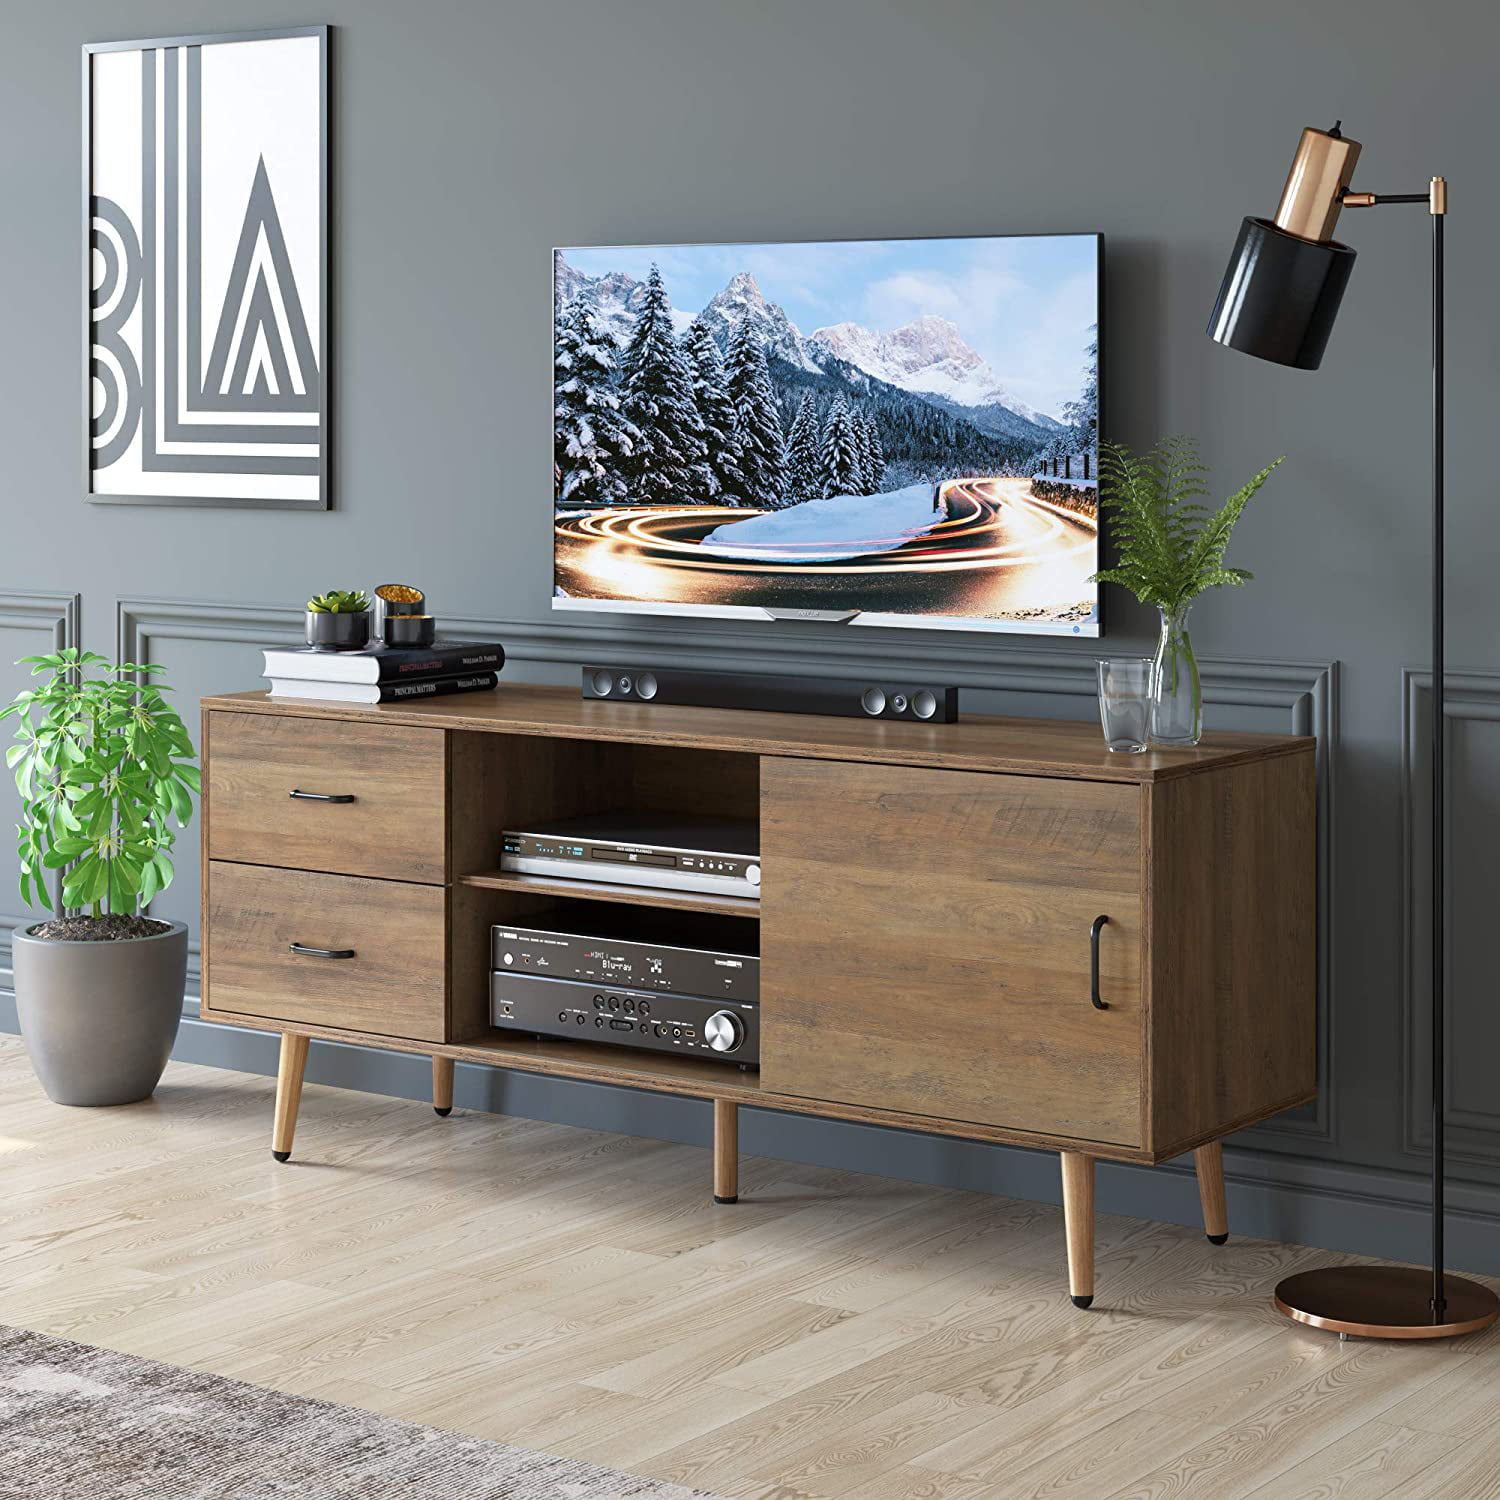 Homfa Tv Cabinet Media Console Table, Wood Tv Stand For Tvs Up To 60 Inside Modern Stands With Shelves (View 4 of 20)